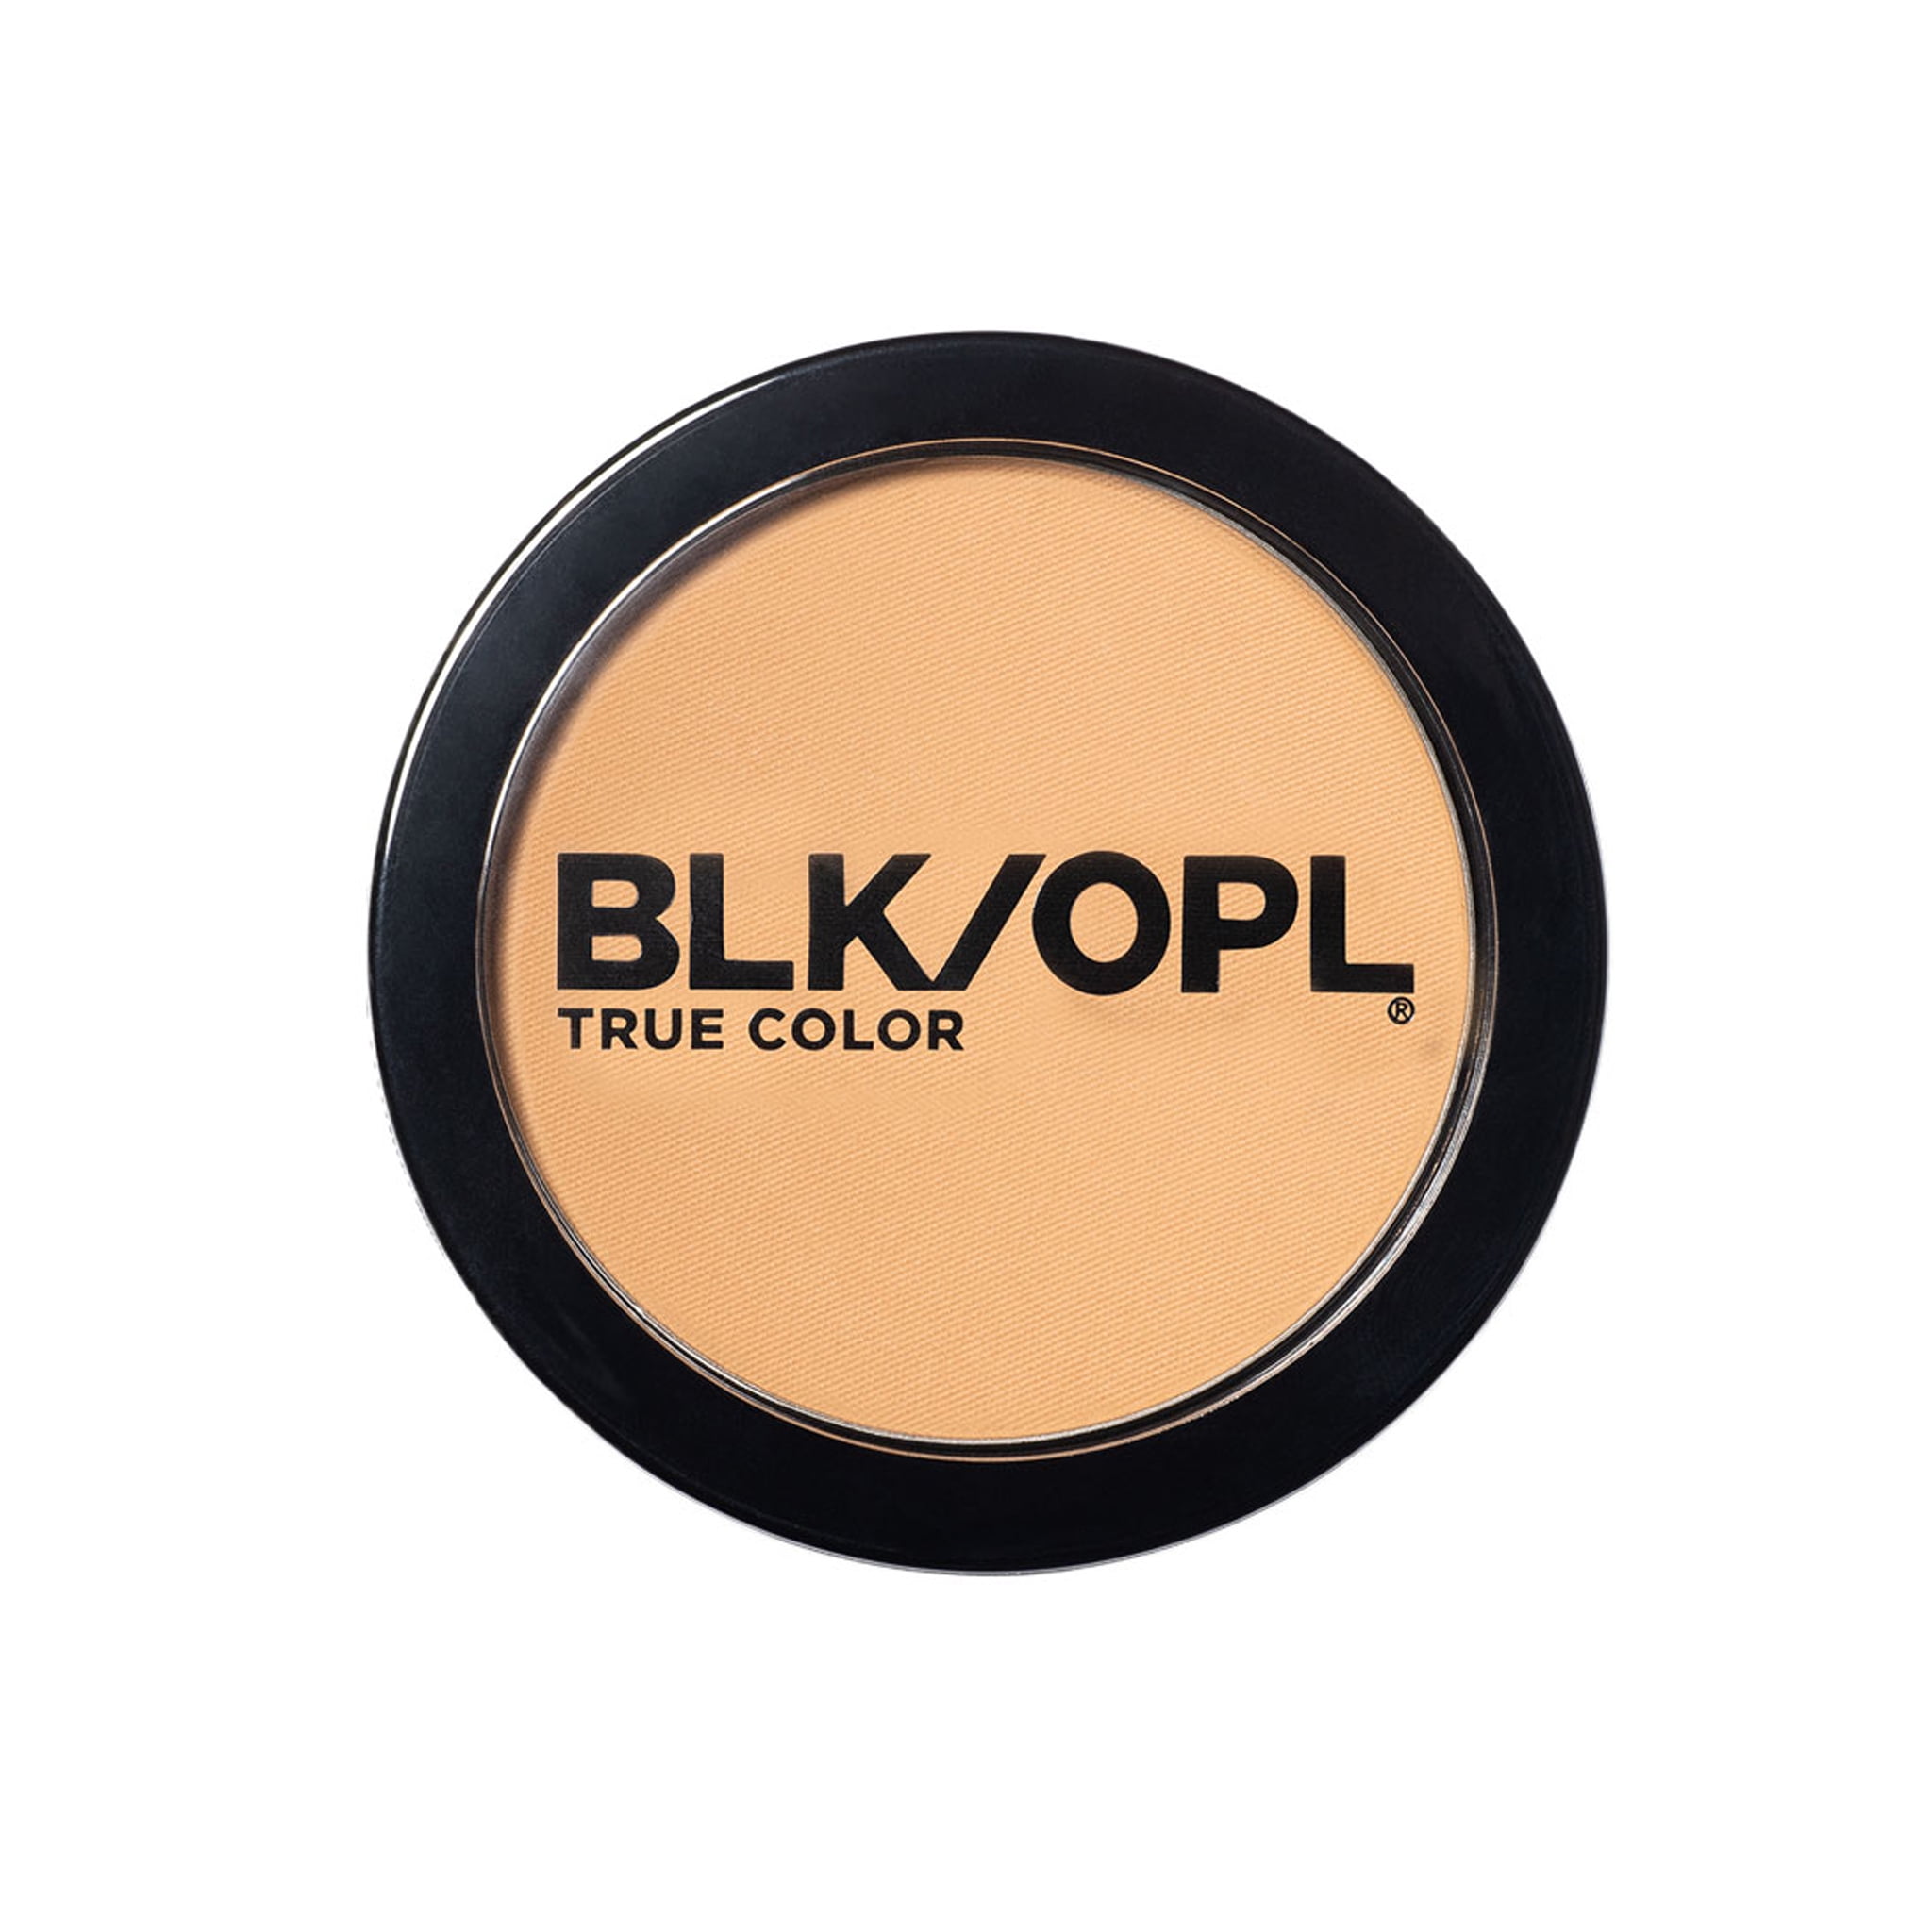 BLK/OPL Oil Absorbing Pressed Powder, Around the Clay Girl